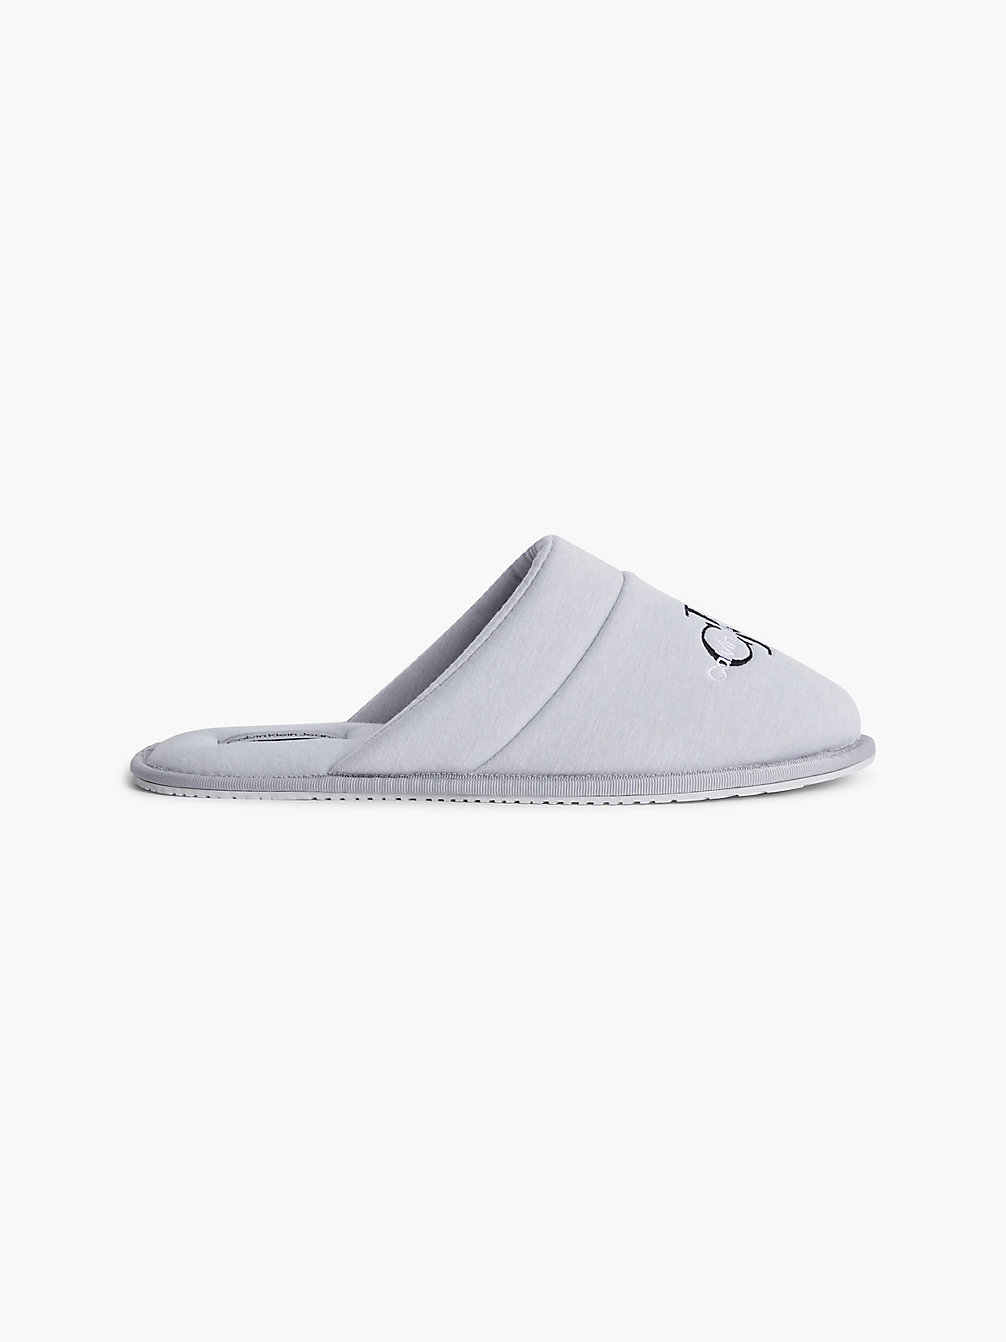 SILVER GREY Recycled Slippers undefined men Calvin Klein